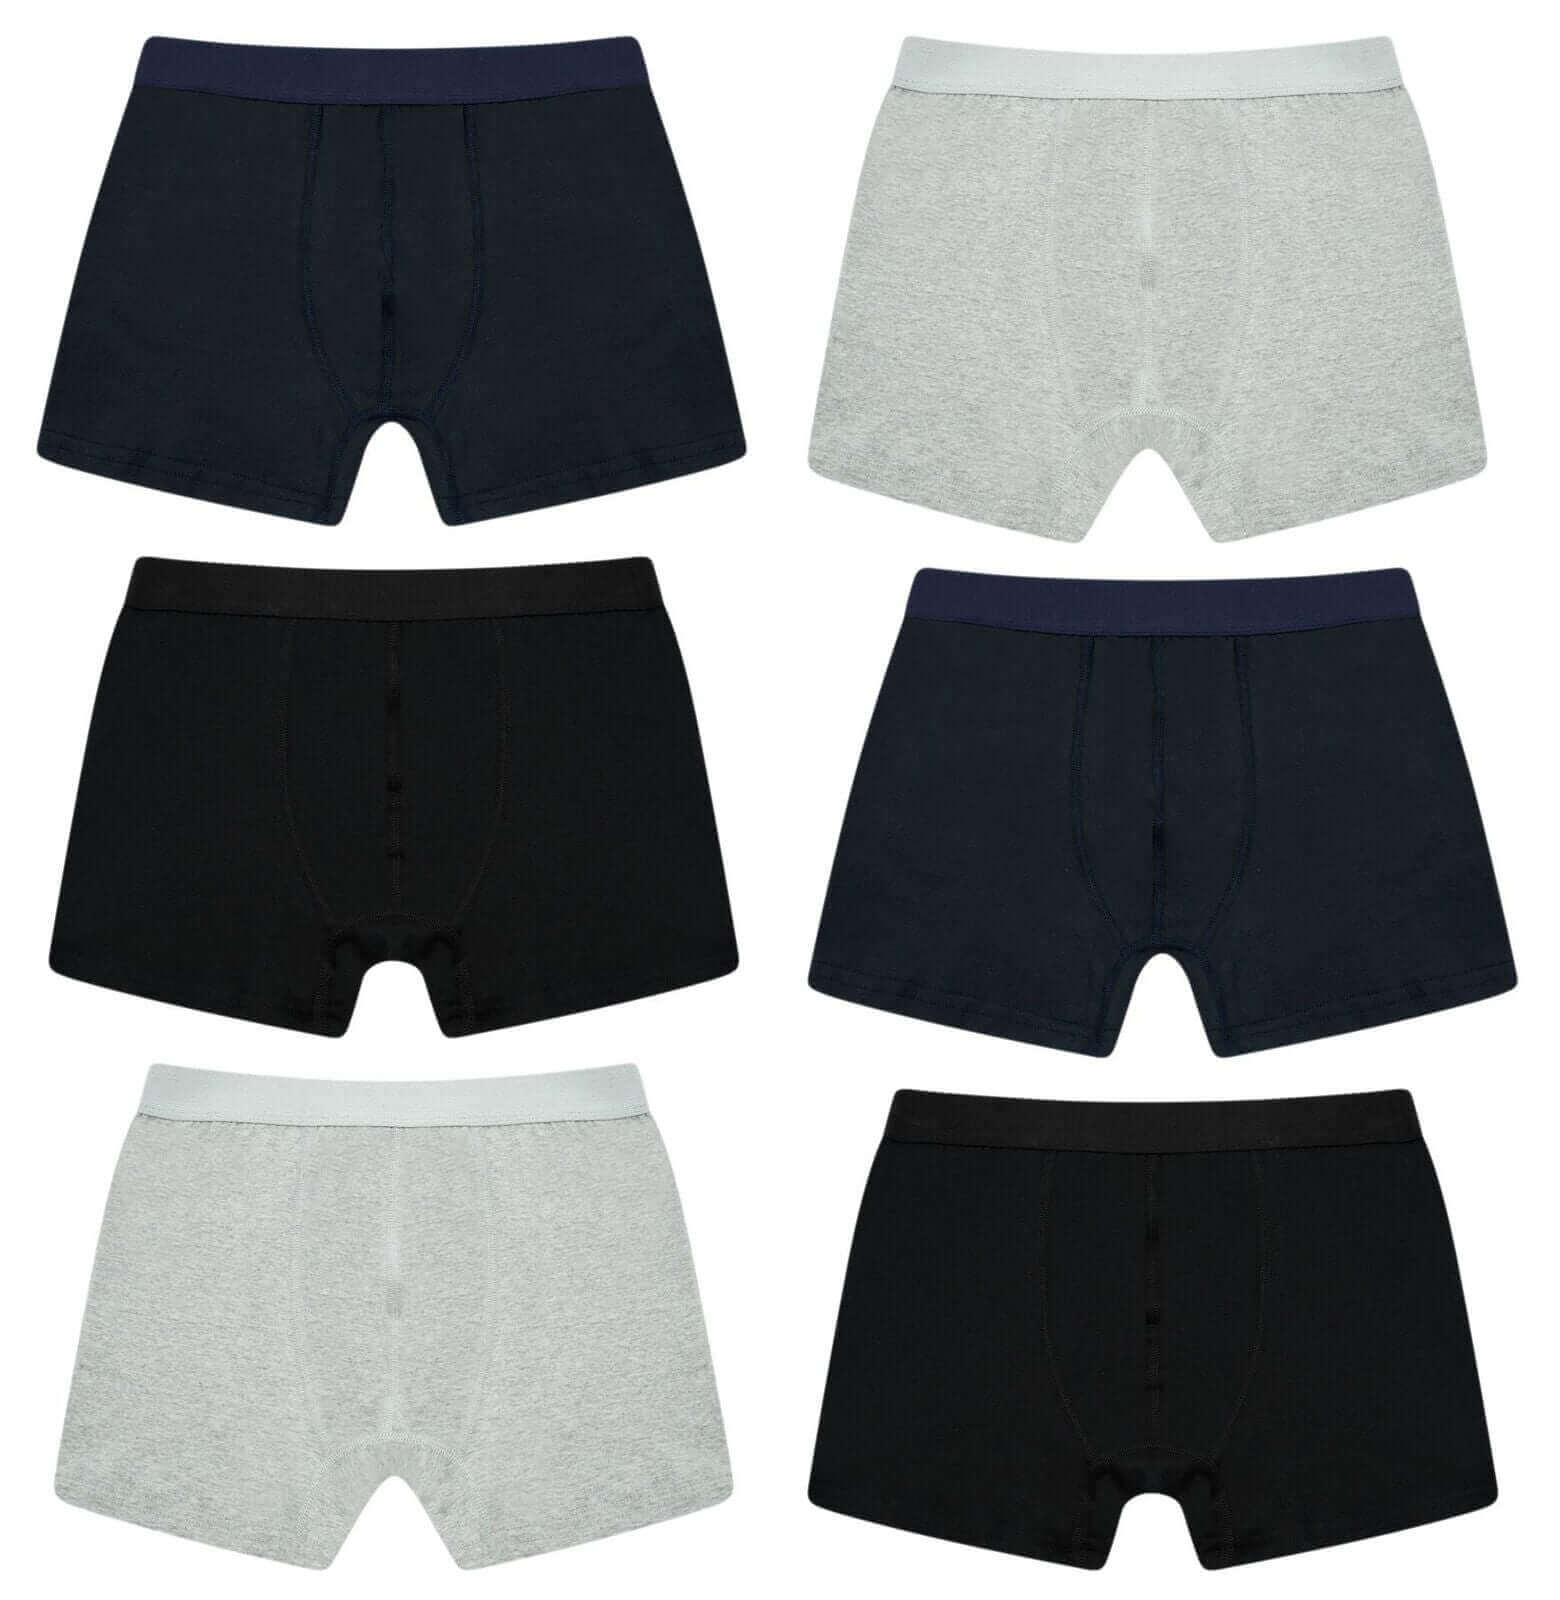 Men's Boxer Shorts Cotton Rich Comfort Fit Plain Underwear, 6 Pairs. Buy now for £9.00. A Boxer Shorts by Sock Stack. black, boxer shorts, classic boxers, cotton, grey, large, medium, navy, Out of stock, small, underwear, x large.